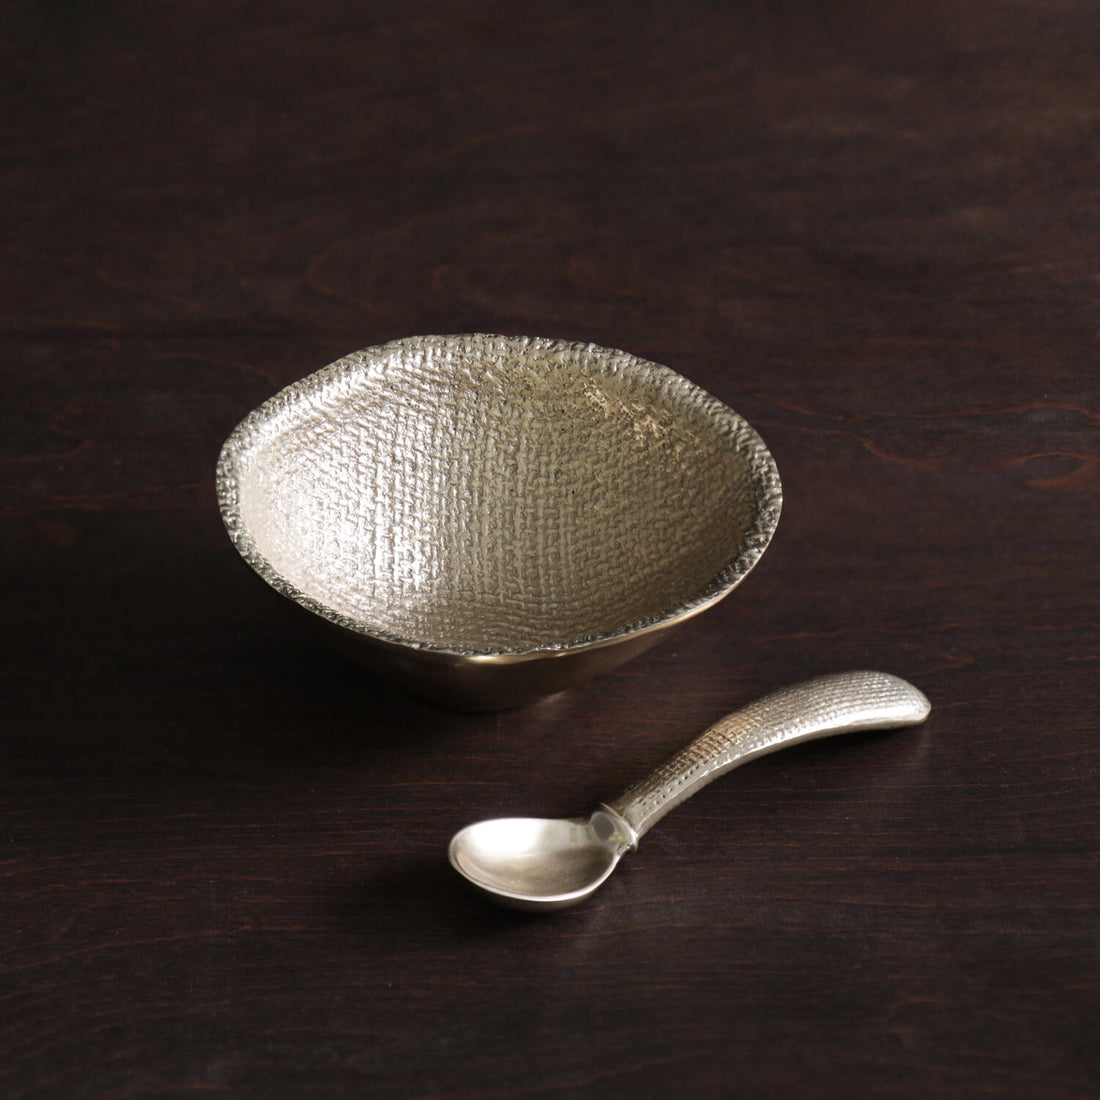 GIFTABLES Sierra Modern Chelsea Petit Bowl with Spoon (Gold)